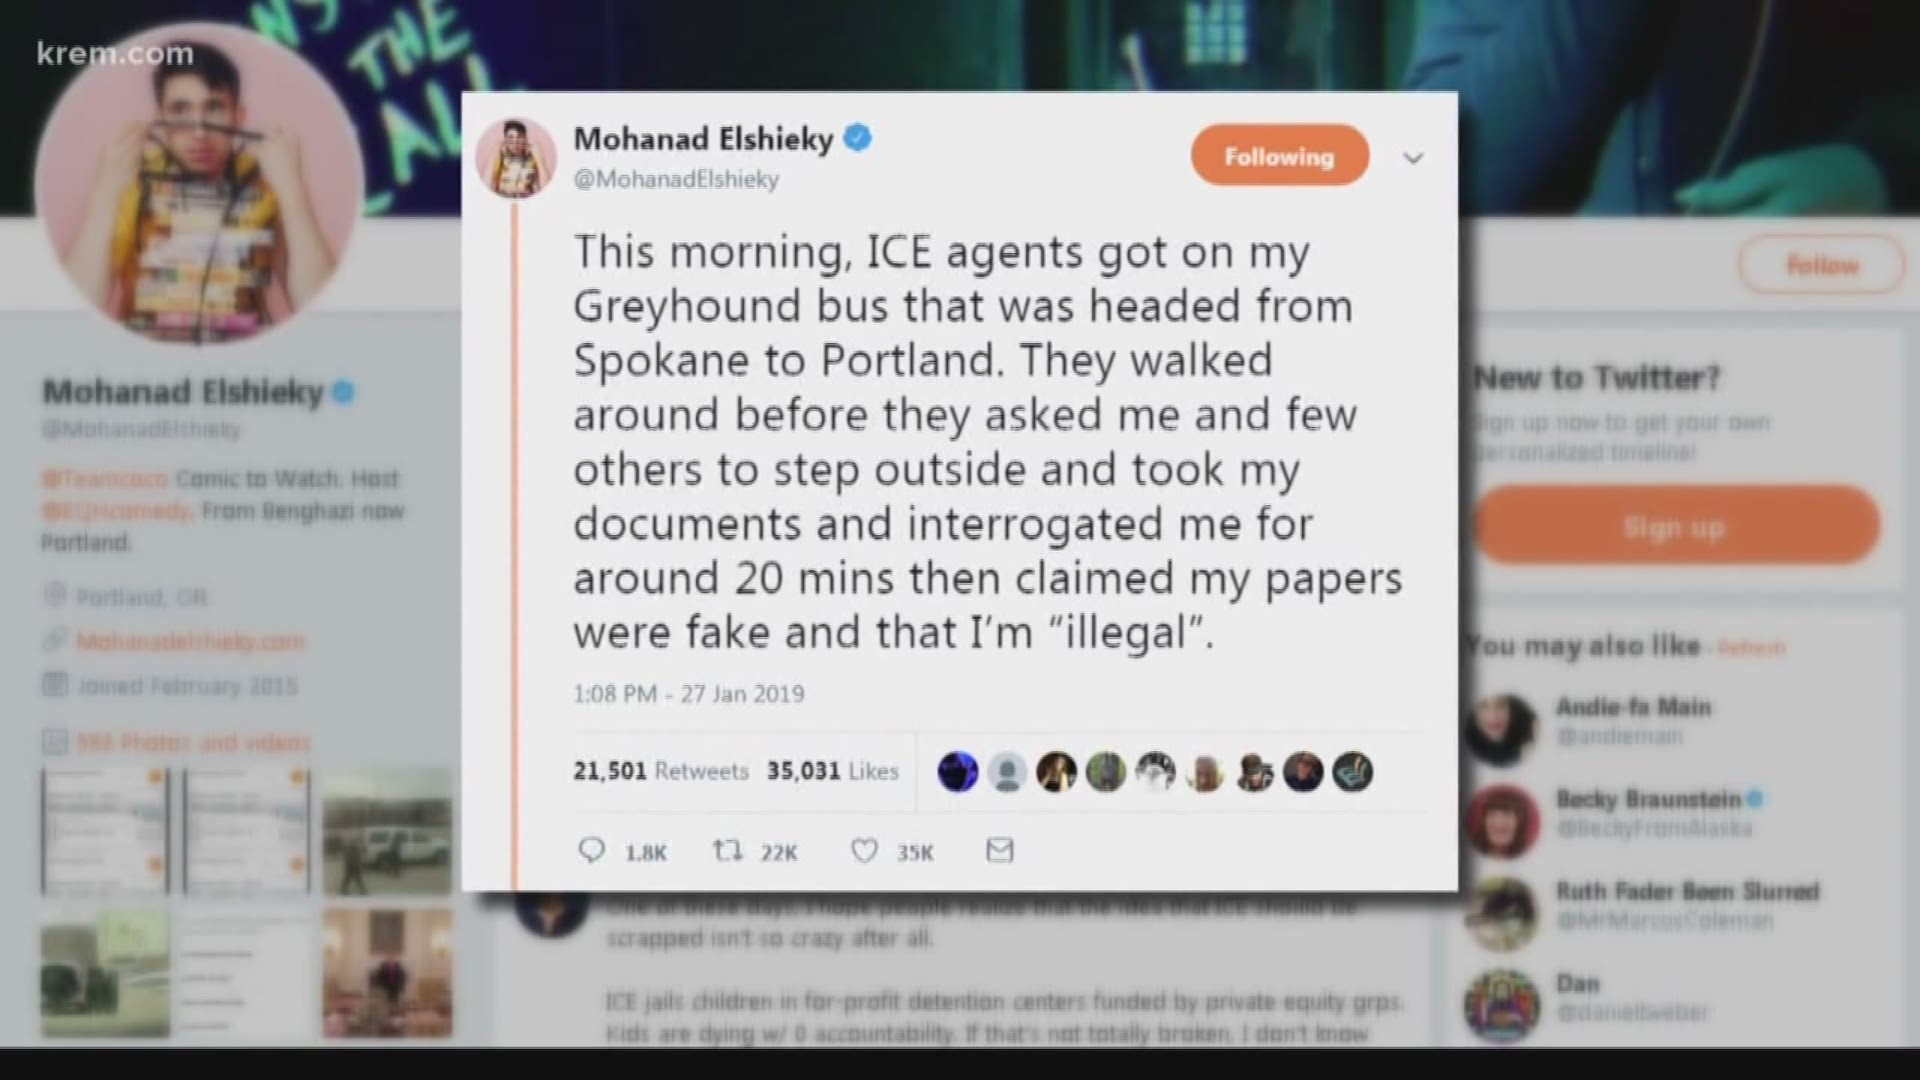 Mohanad Elshieky tweeted that ICE agents took his documents and interrogated him for some time while he was waiting to depart on a bus to Portland in Spokane.